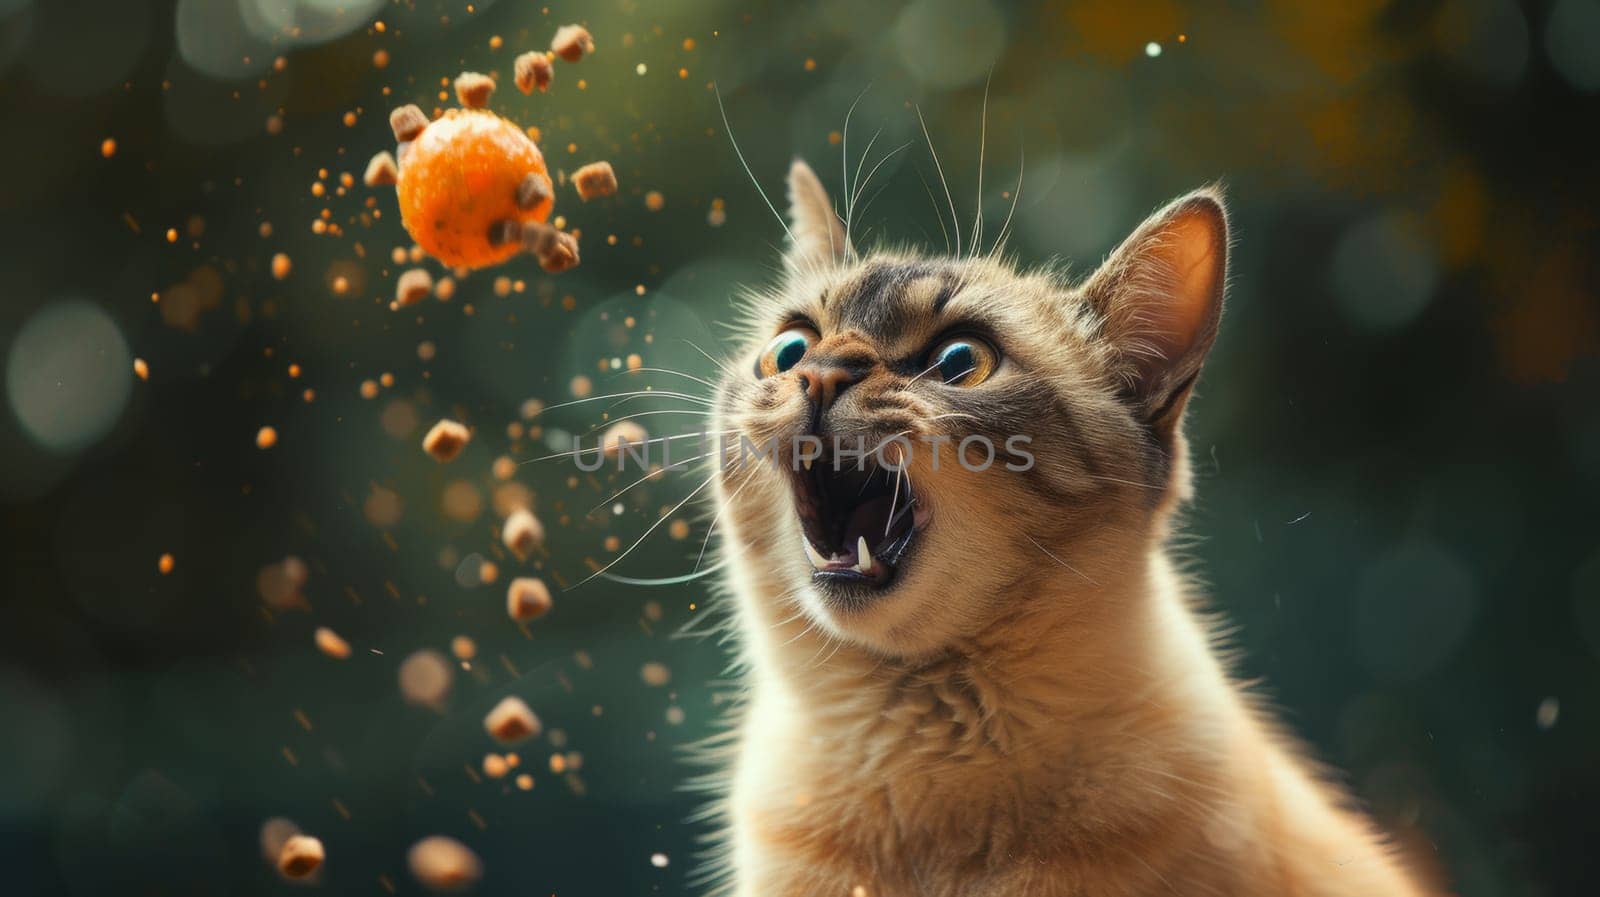 A cat is looking at a orange ball that it wants to eat